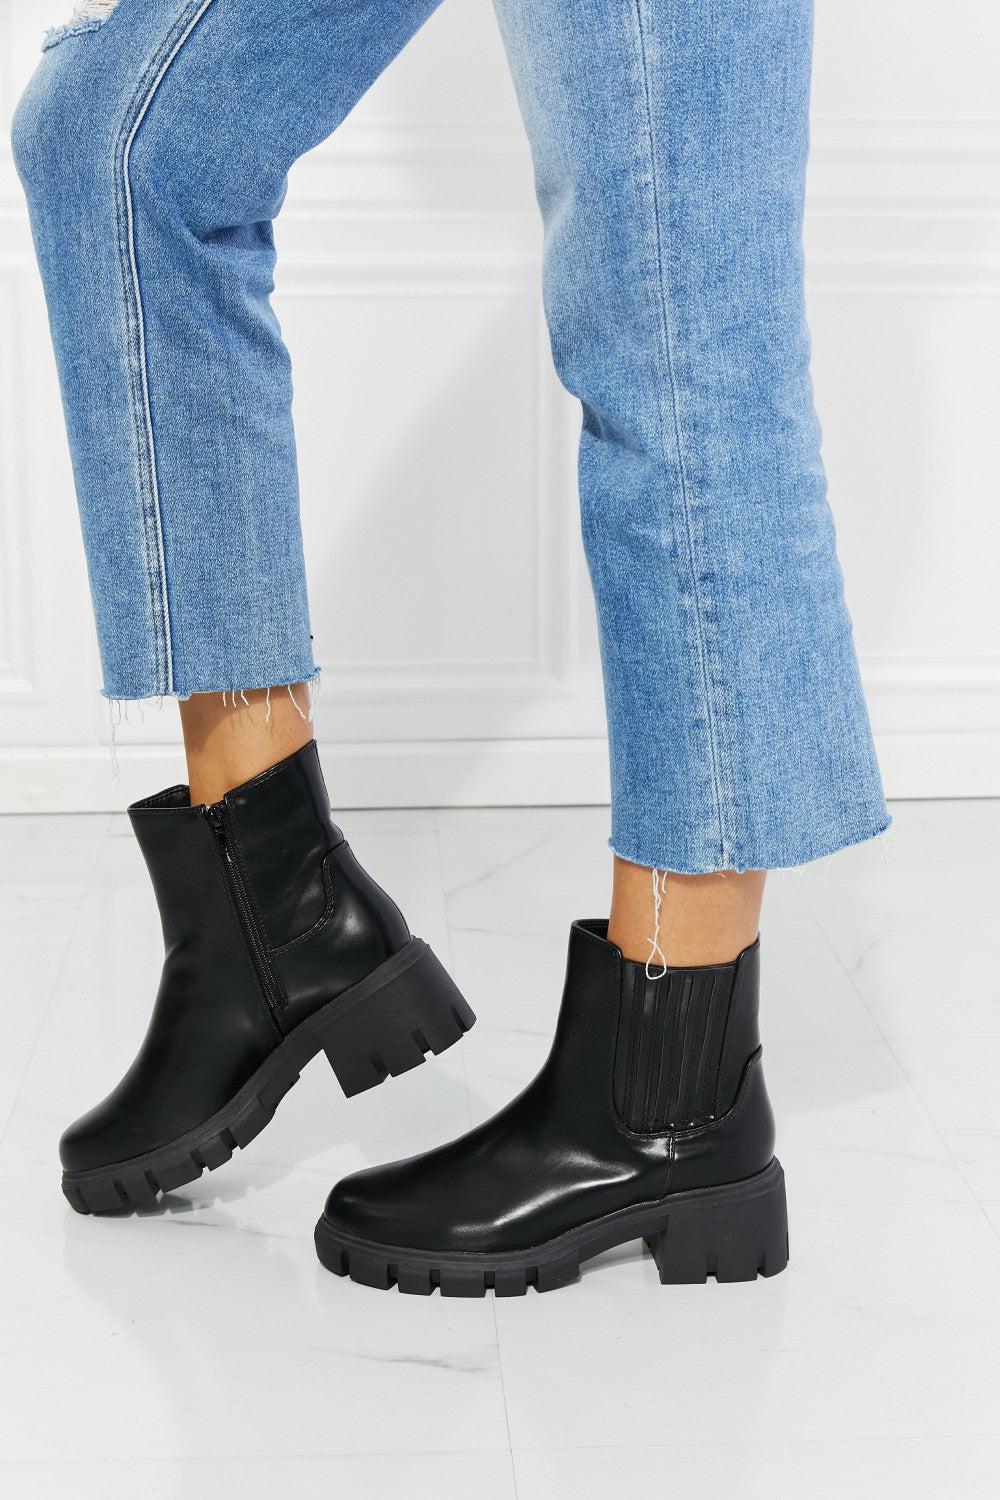 MMShoes What It Takes Lug Sole Chelsea Boots in Black BLUE ZONE PLANET